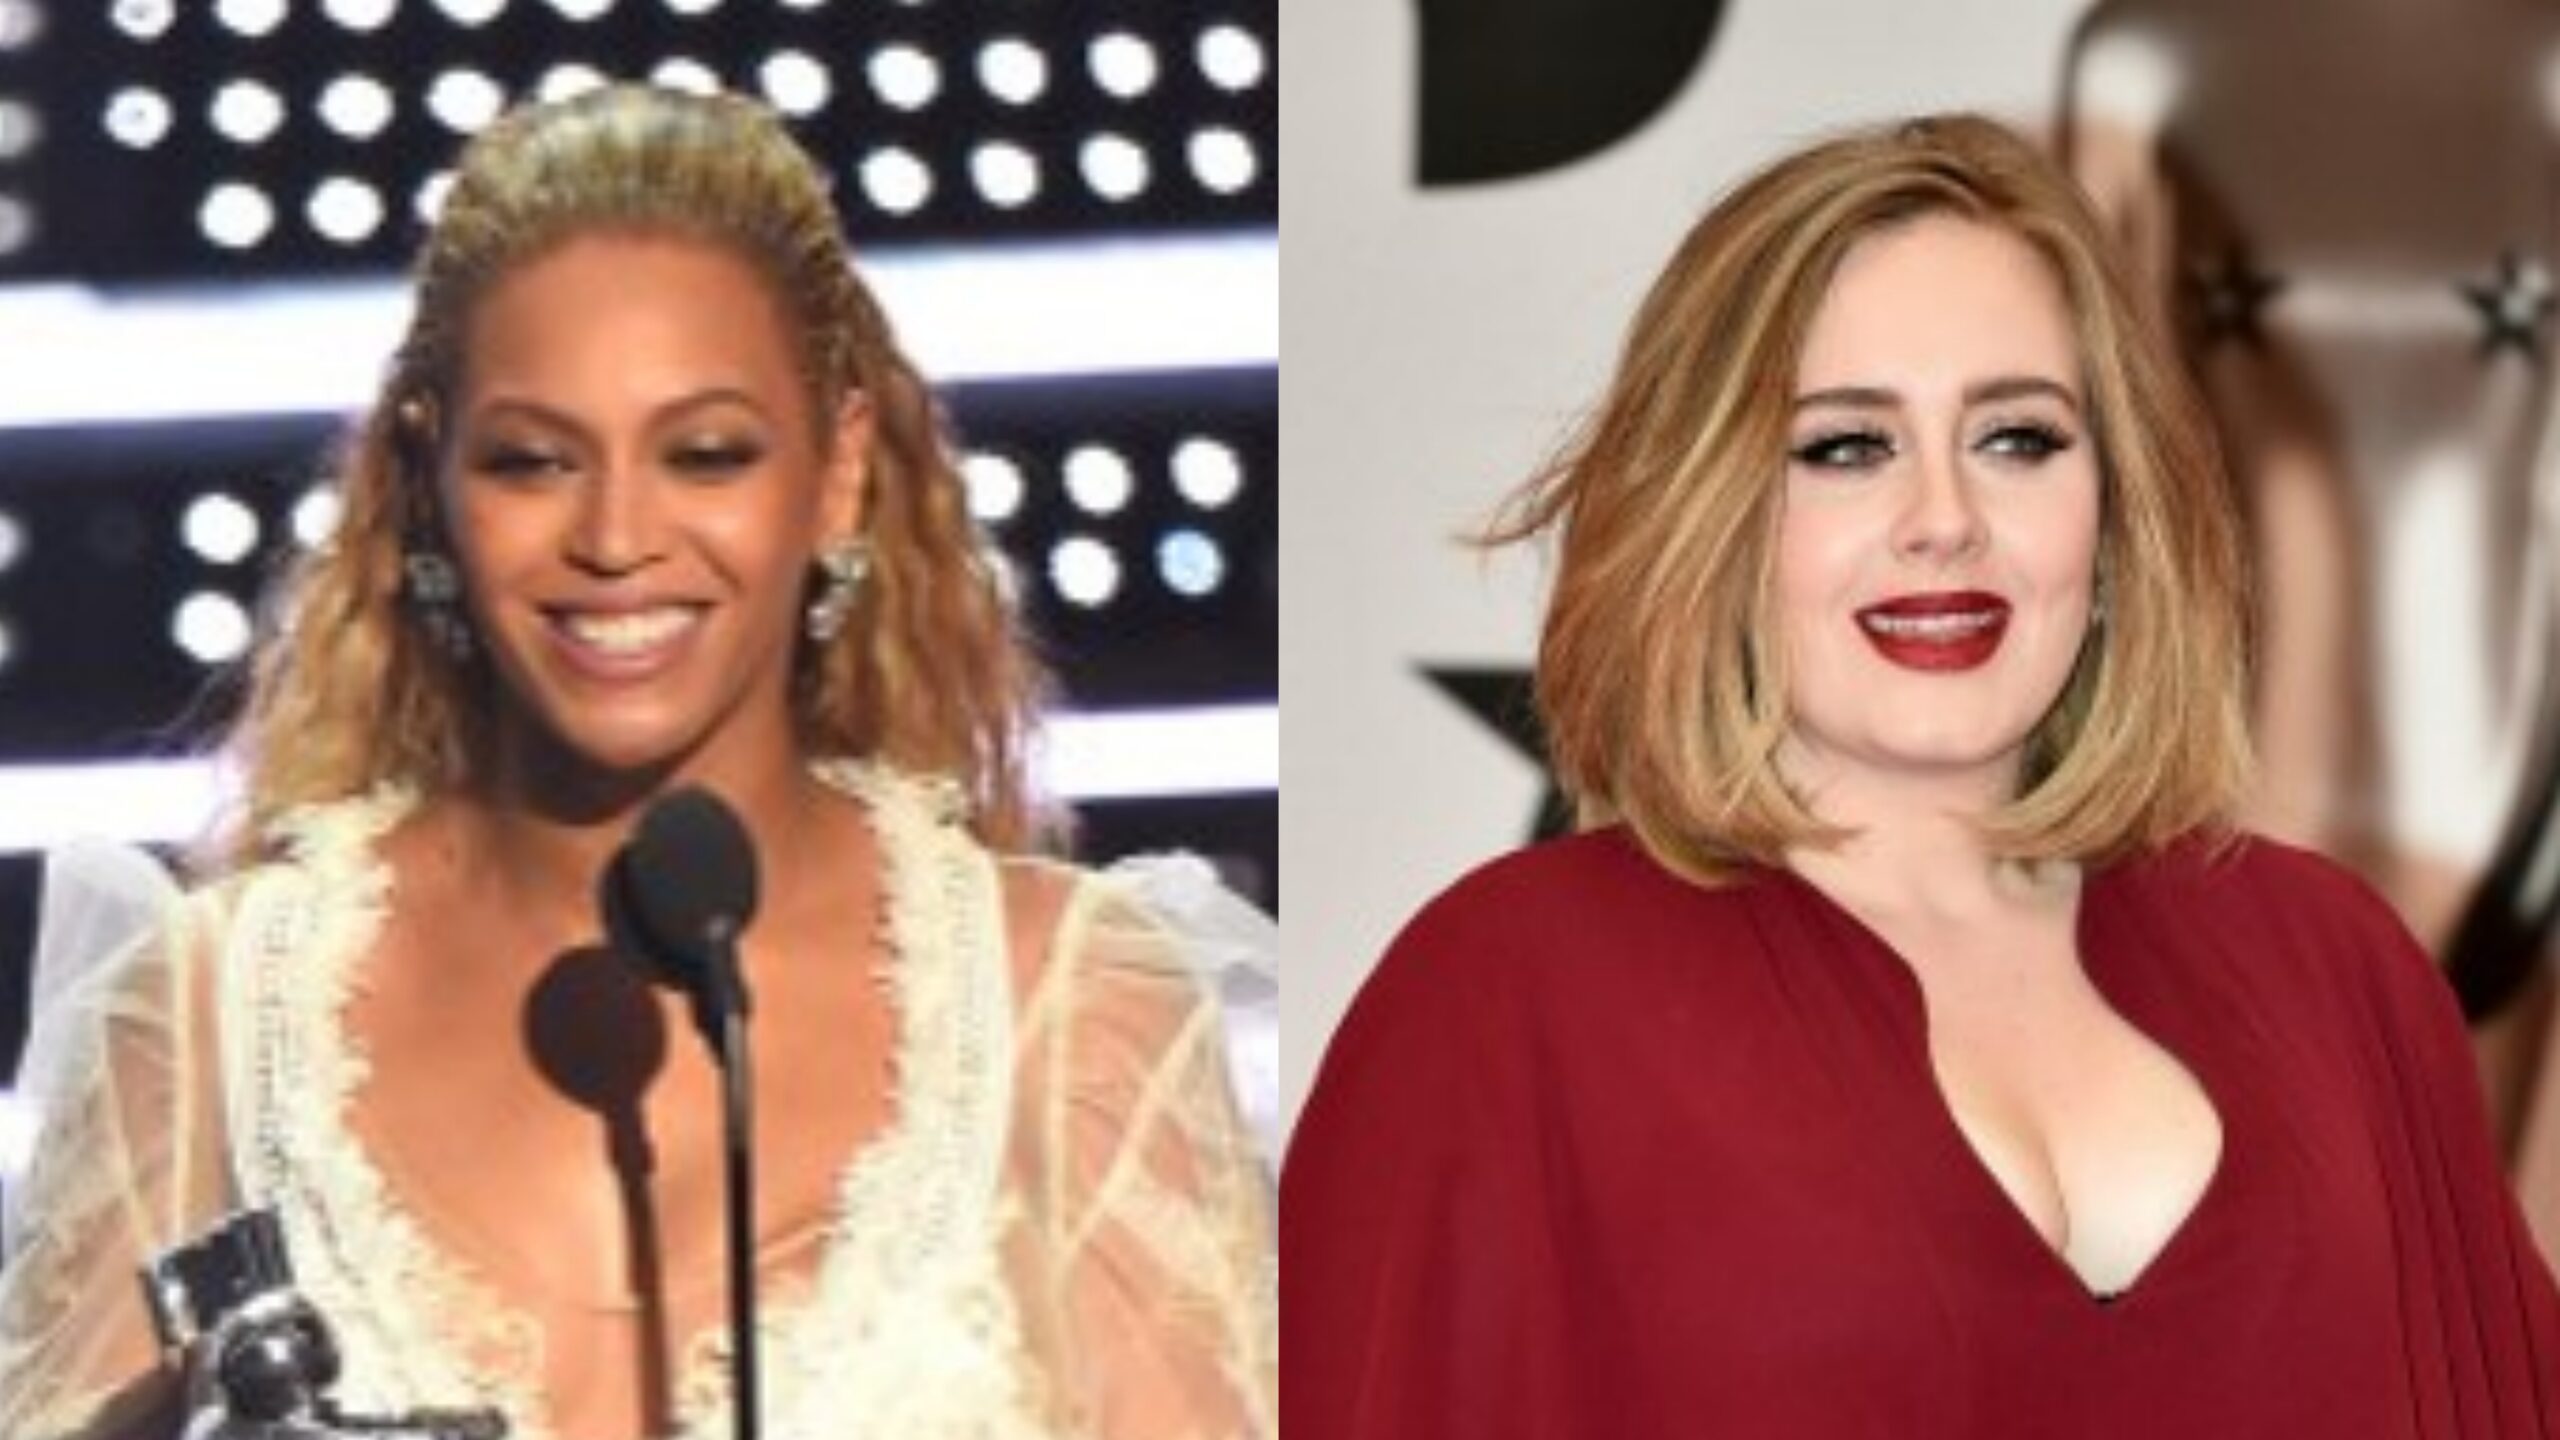 Beyonce vs. Adele at the Grammys, music’s biggest night